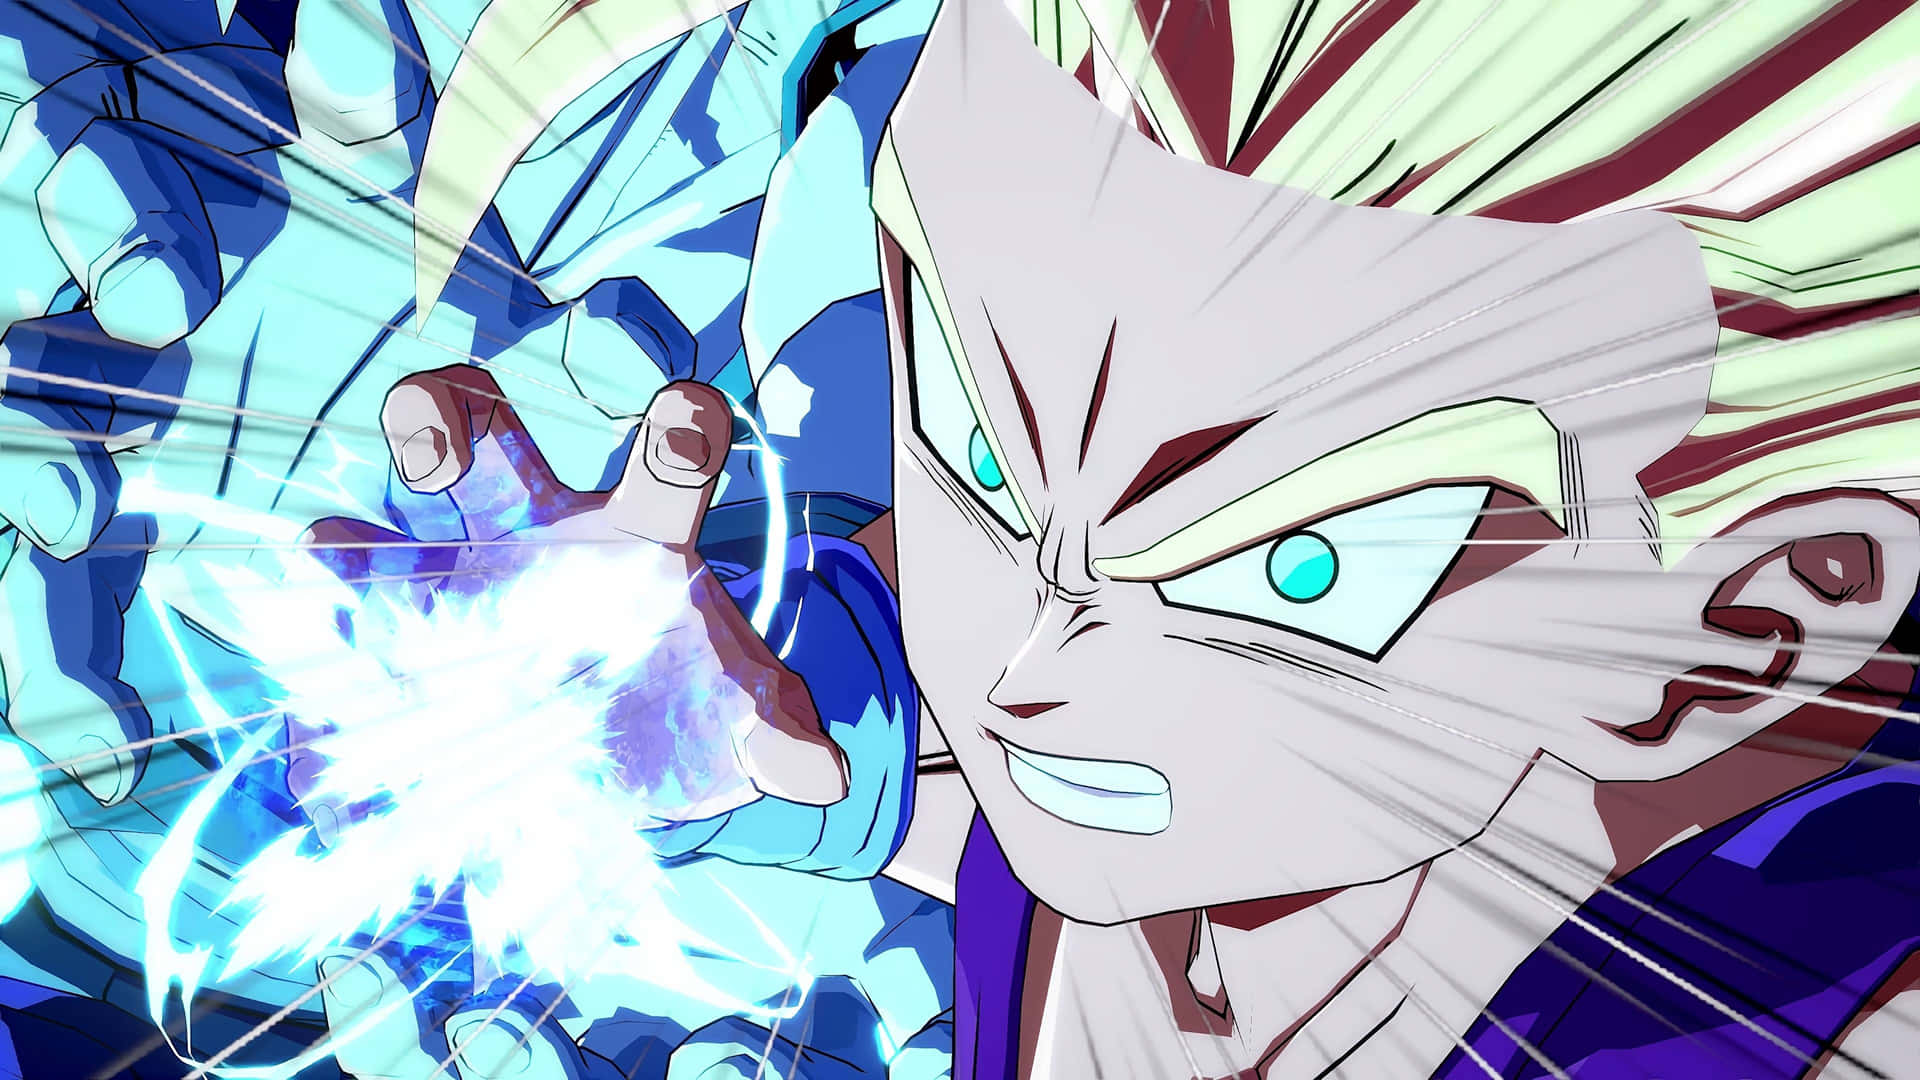 Get ready to battle with Dragon Ball FighterZ Wallpaper